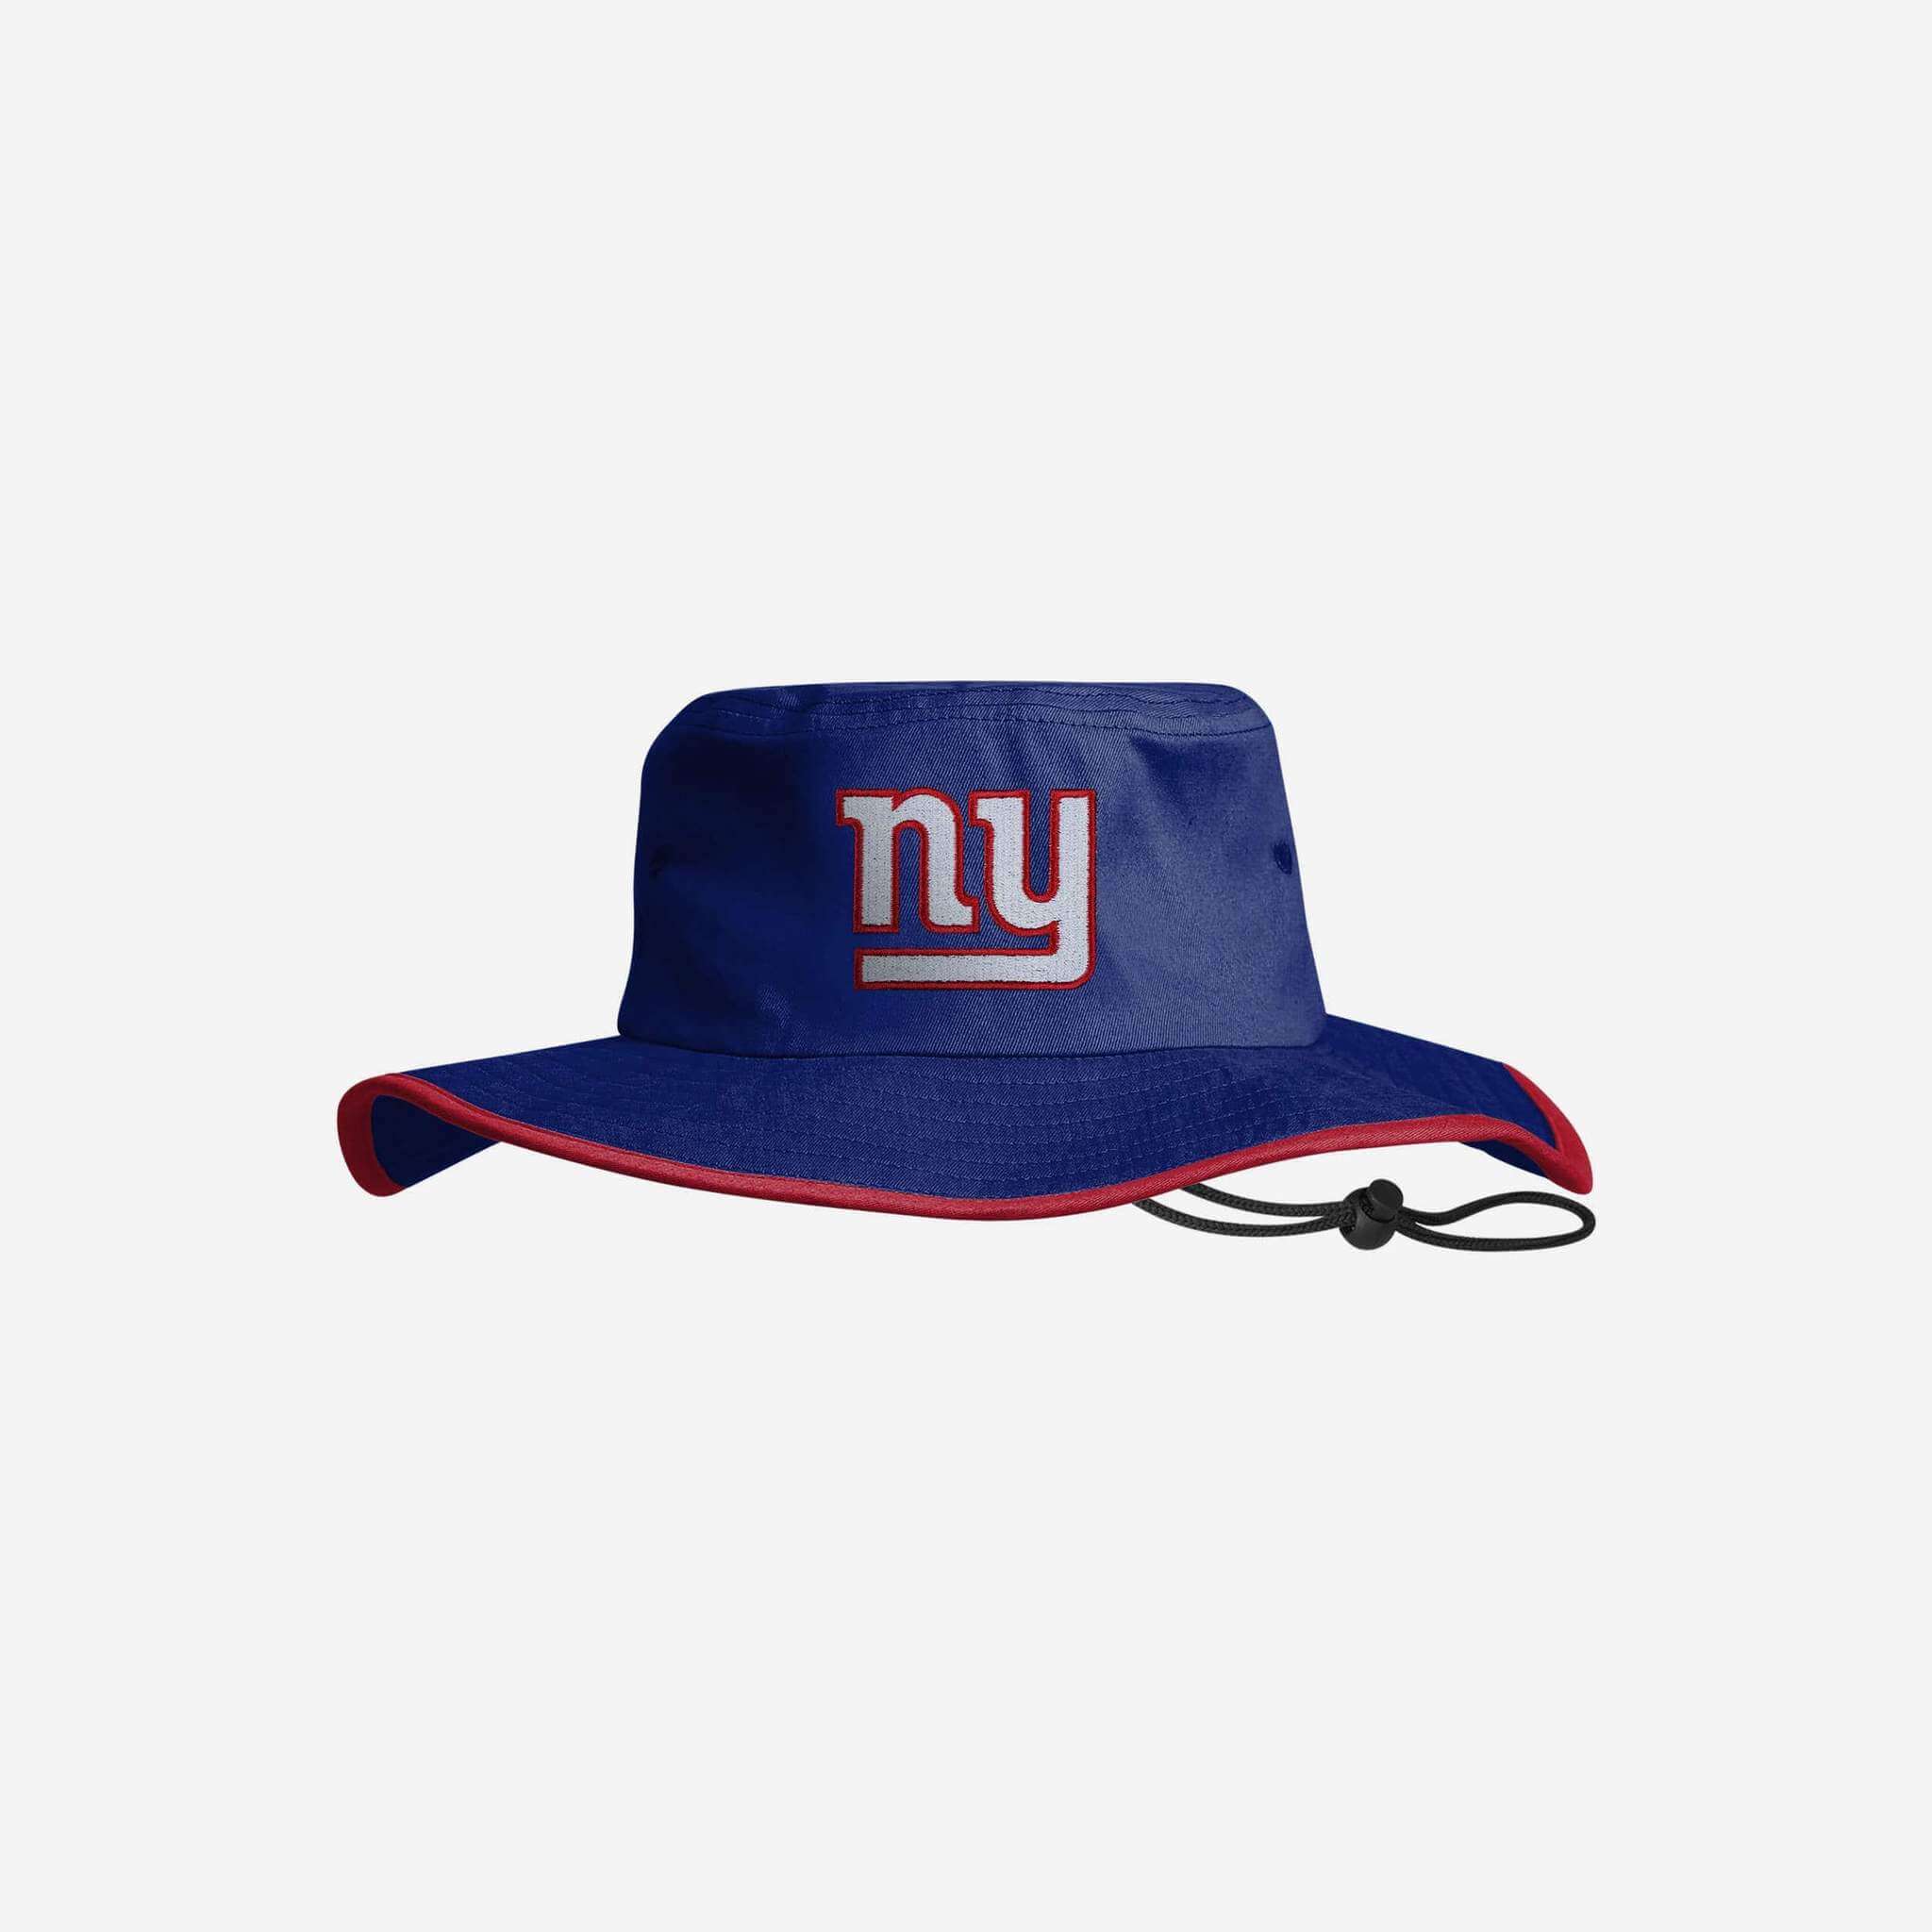 FOCO New York Giants Solid Boonie Hat, $30